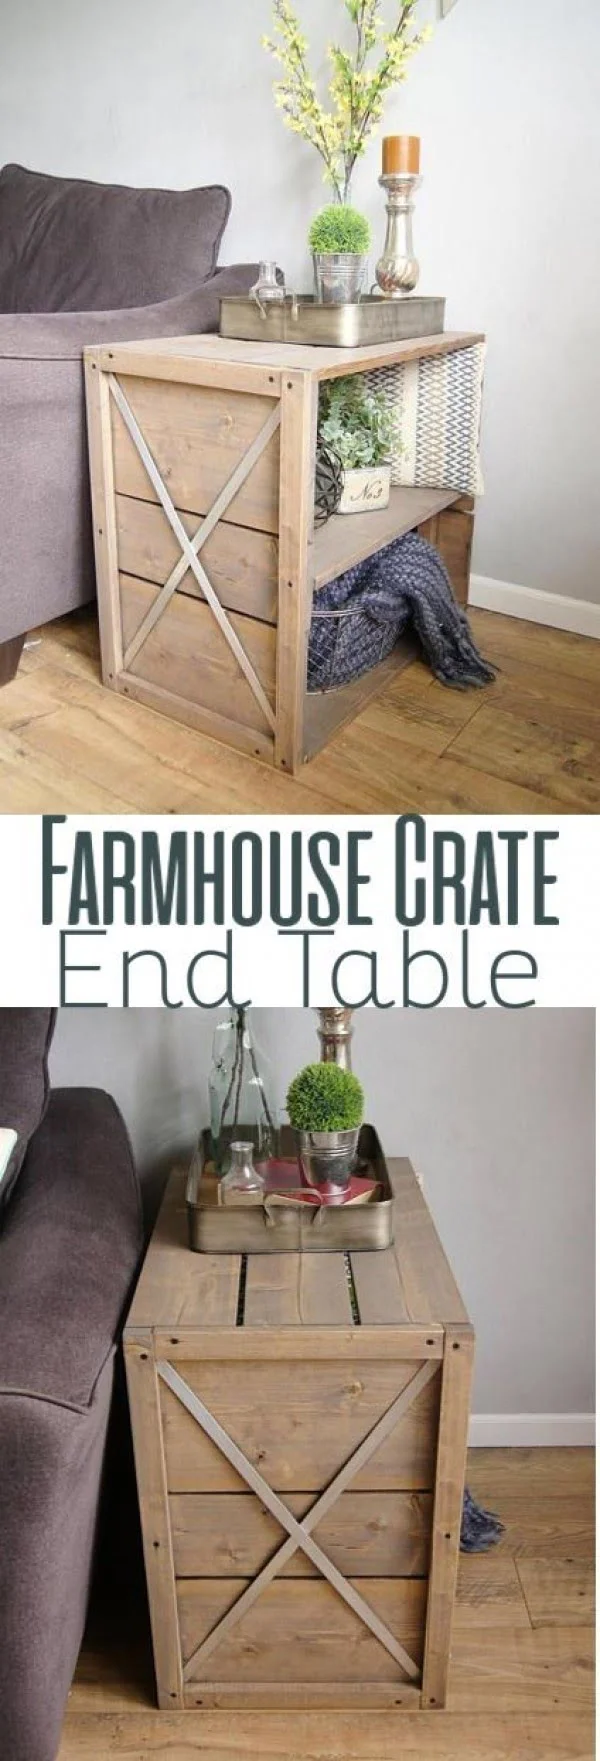 Check out the tutorial how to build a  crate  end table  